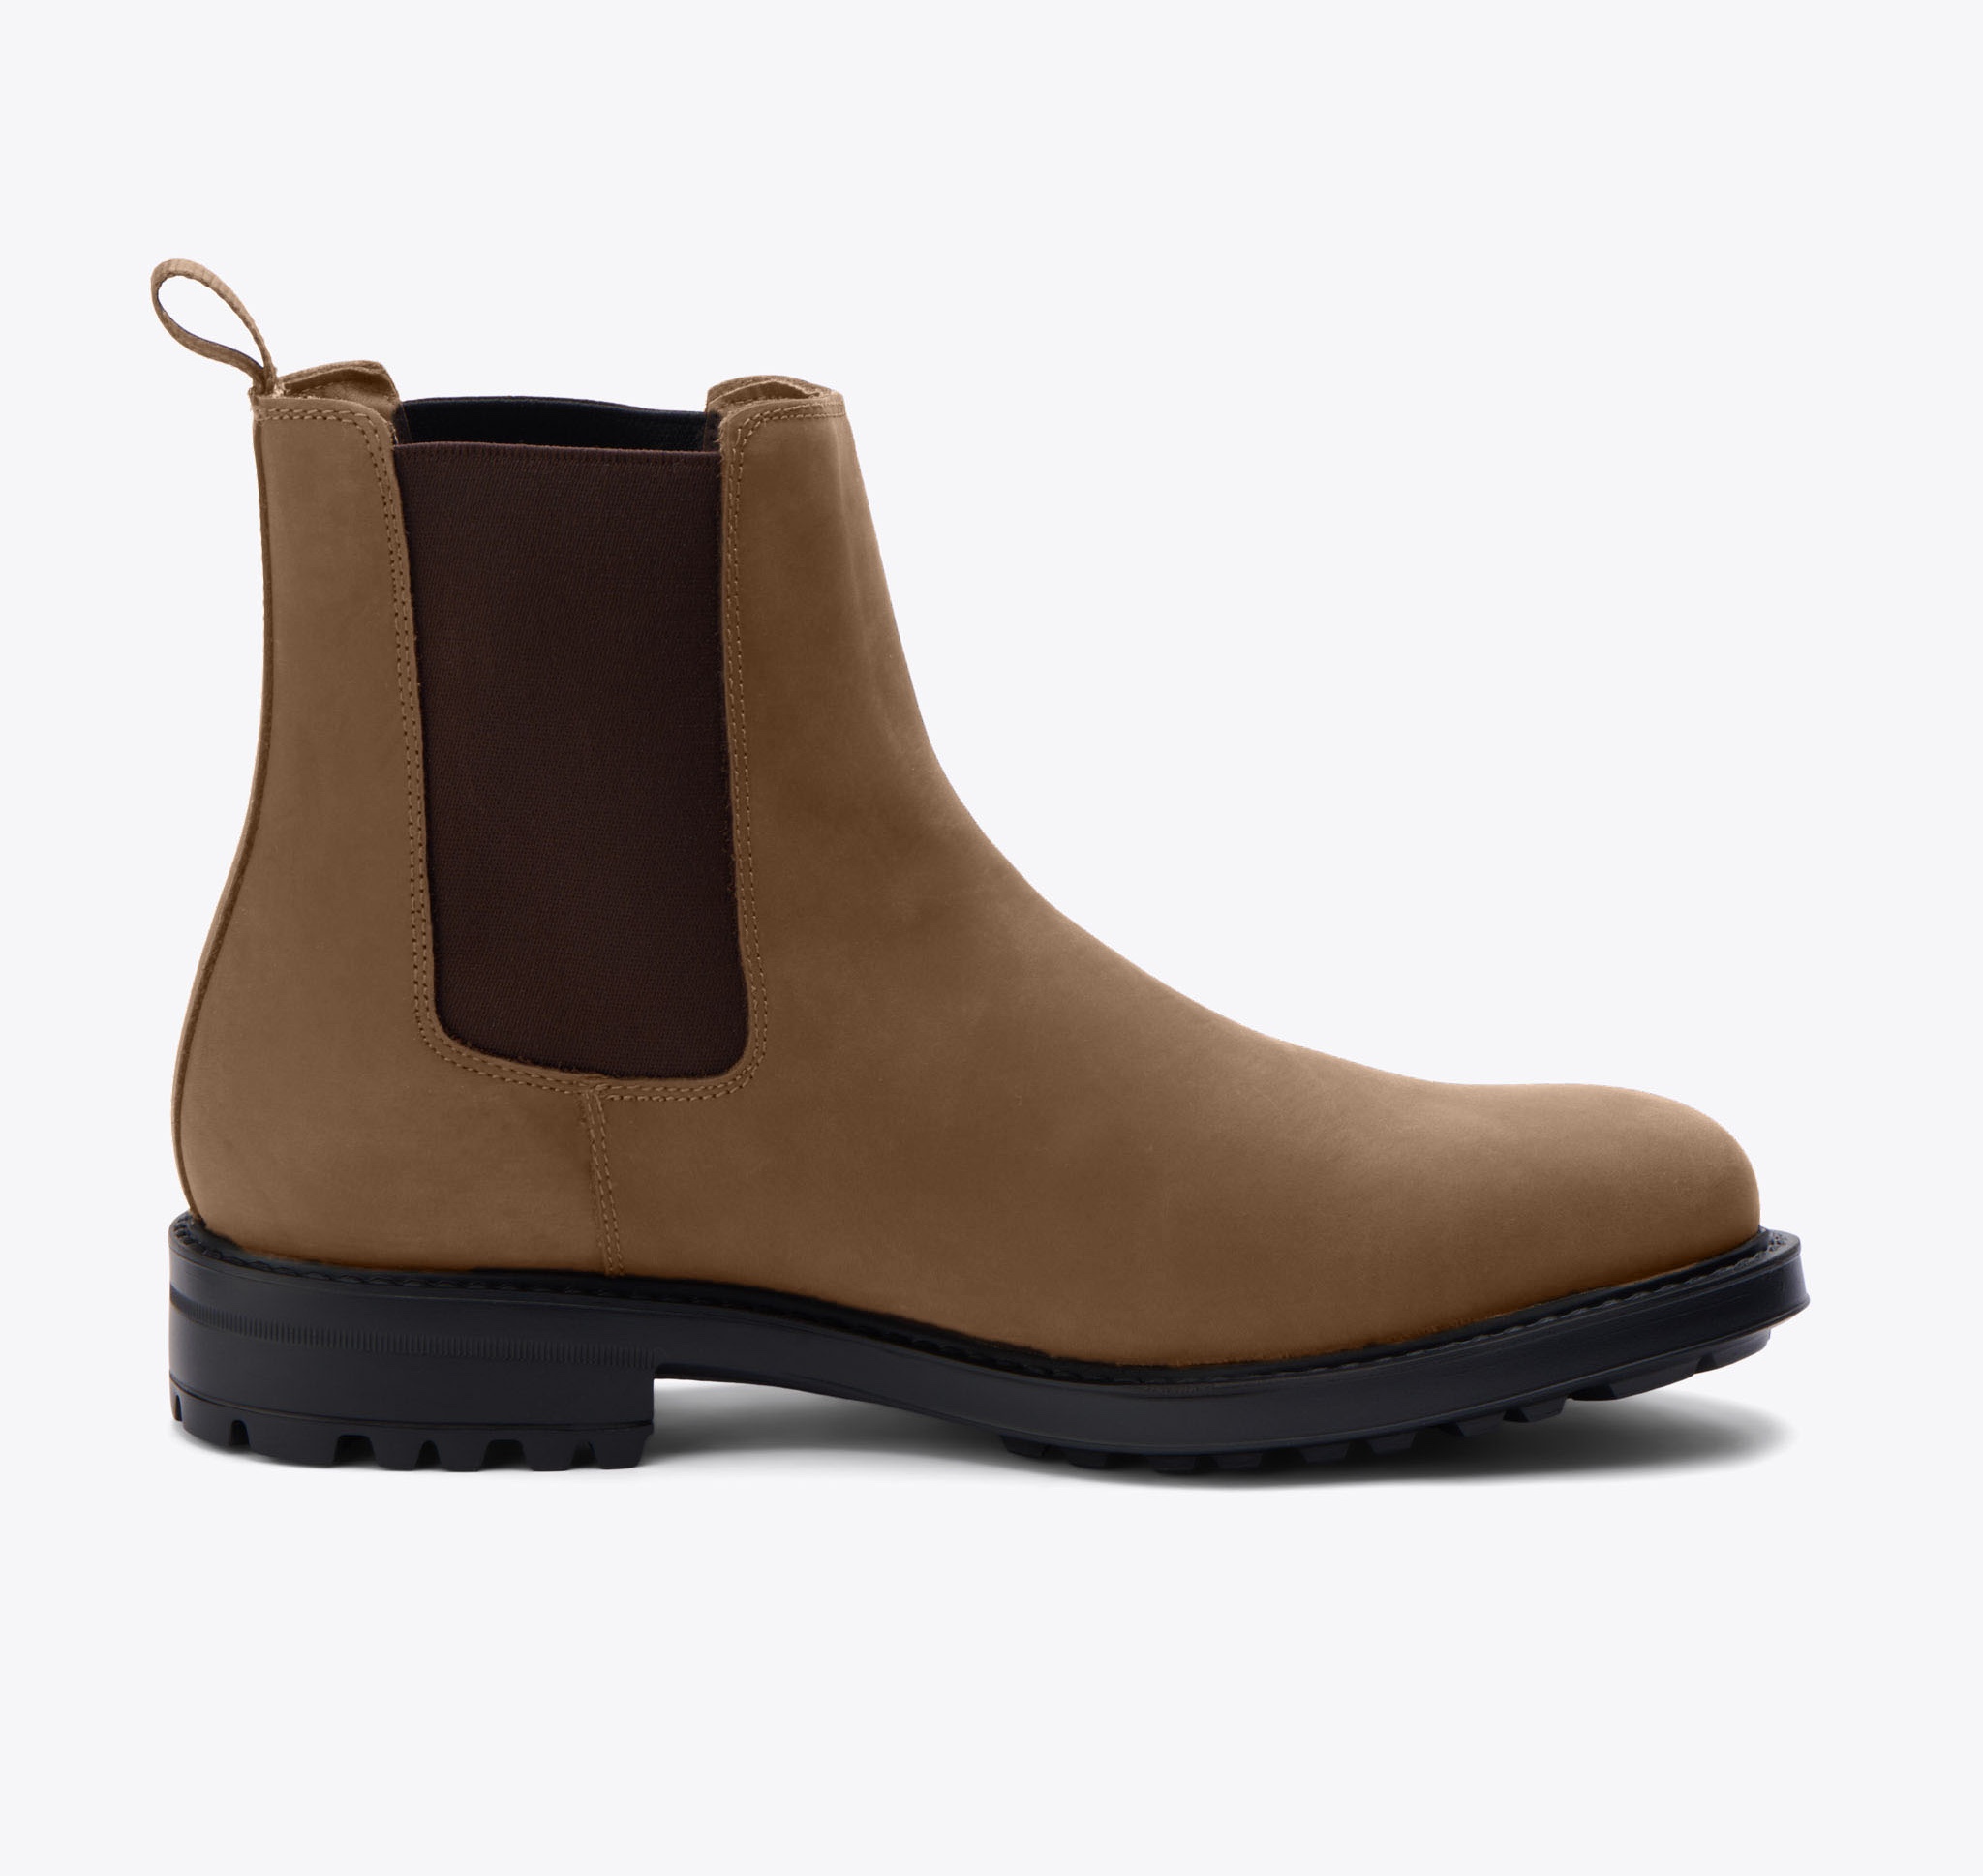 Nisolo Daytripper Chelsea Boot Steel - Every Nisolo product is built on the foundation of comfort, function, and design. 